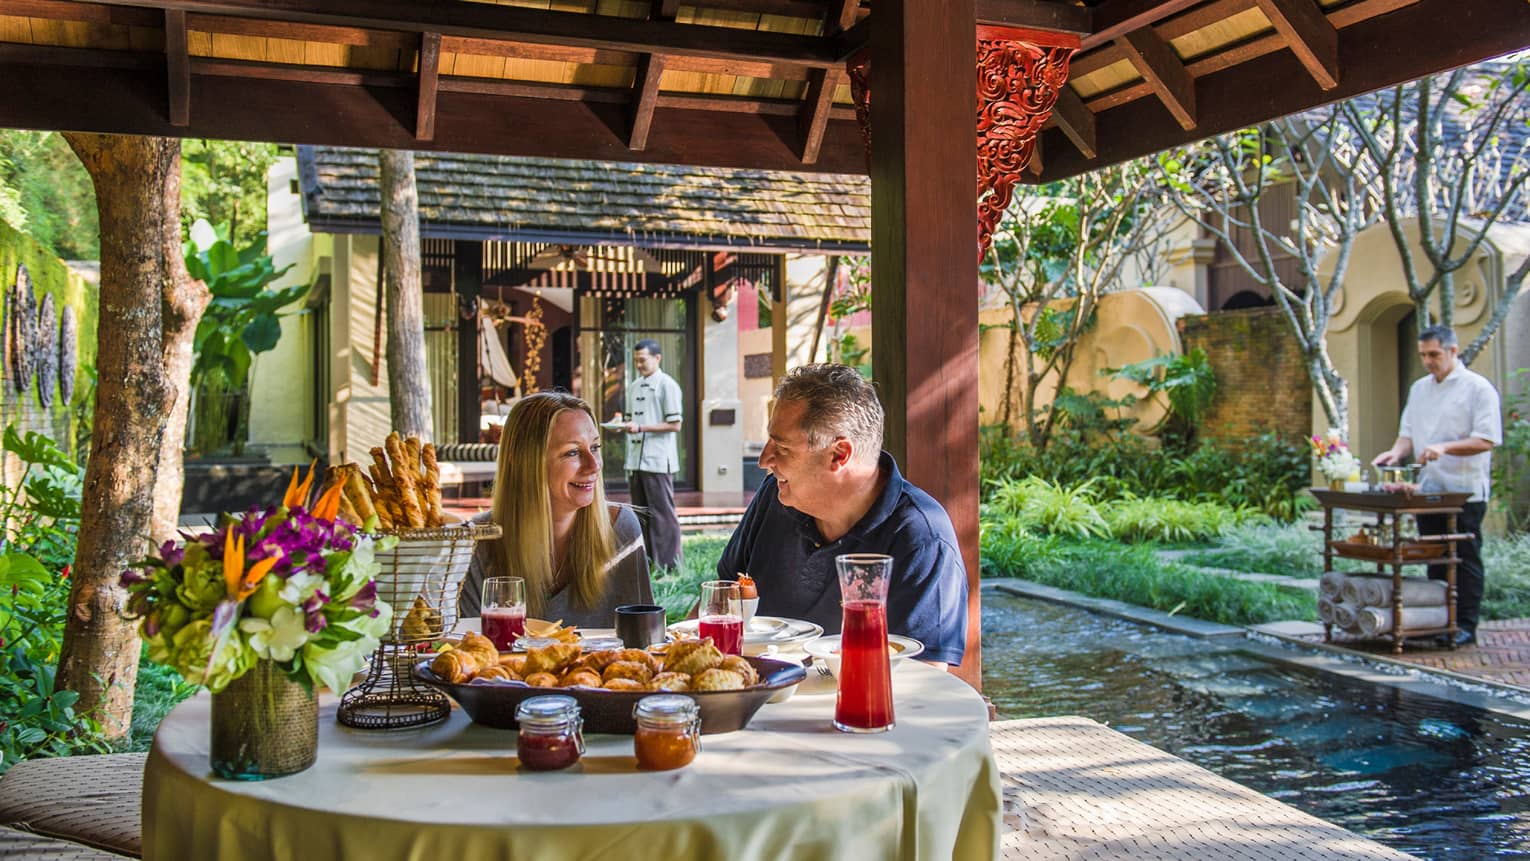 Smiling man and woman dine at table with baskets of pastries, breadsticks under wood gazebo